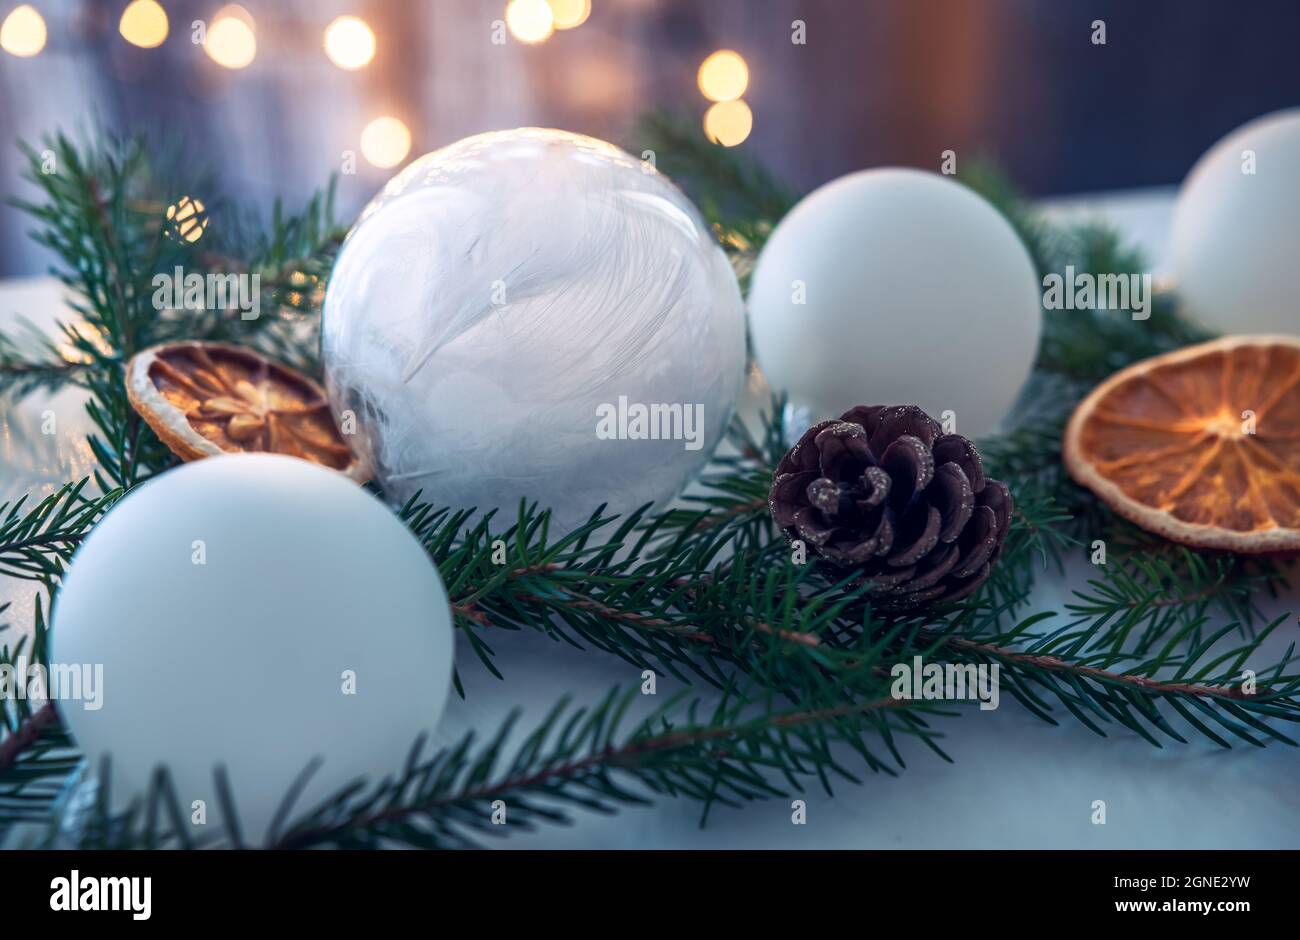 42+ Thousand Christmas Sprigs Royalty-Free Images, Stock Photos